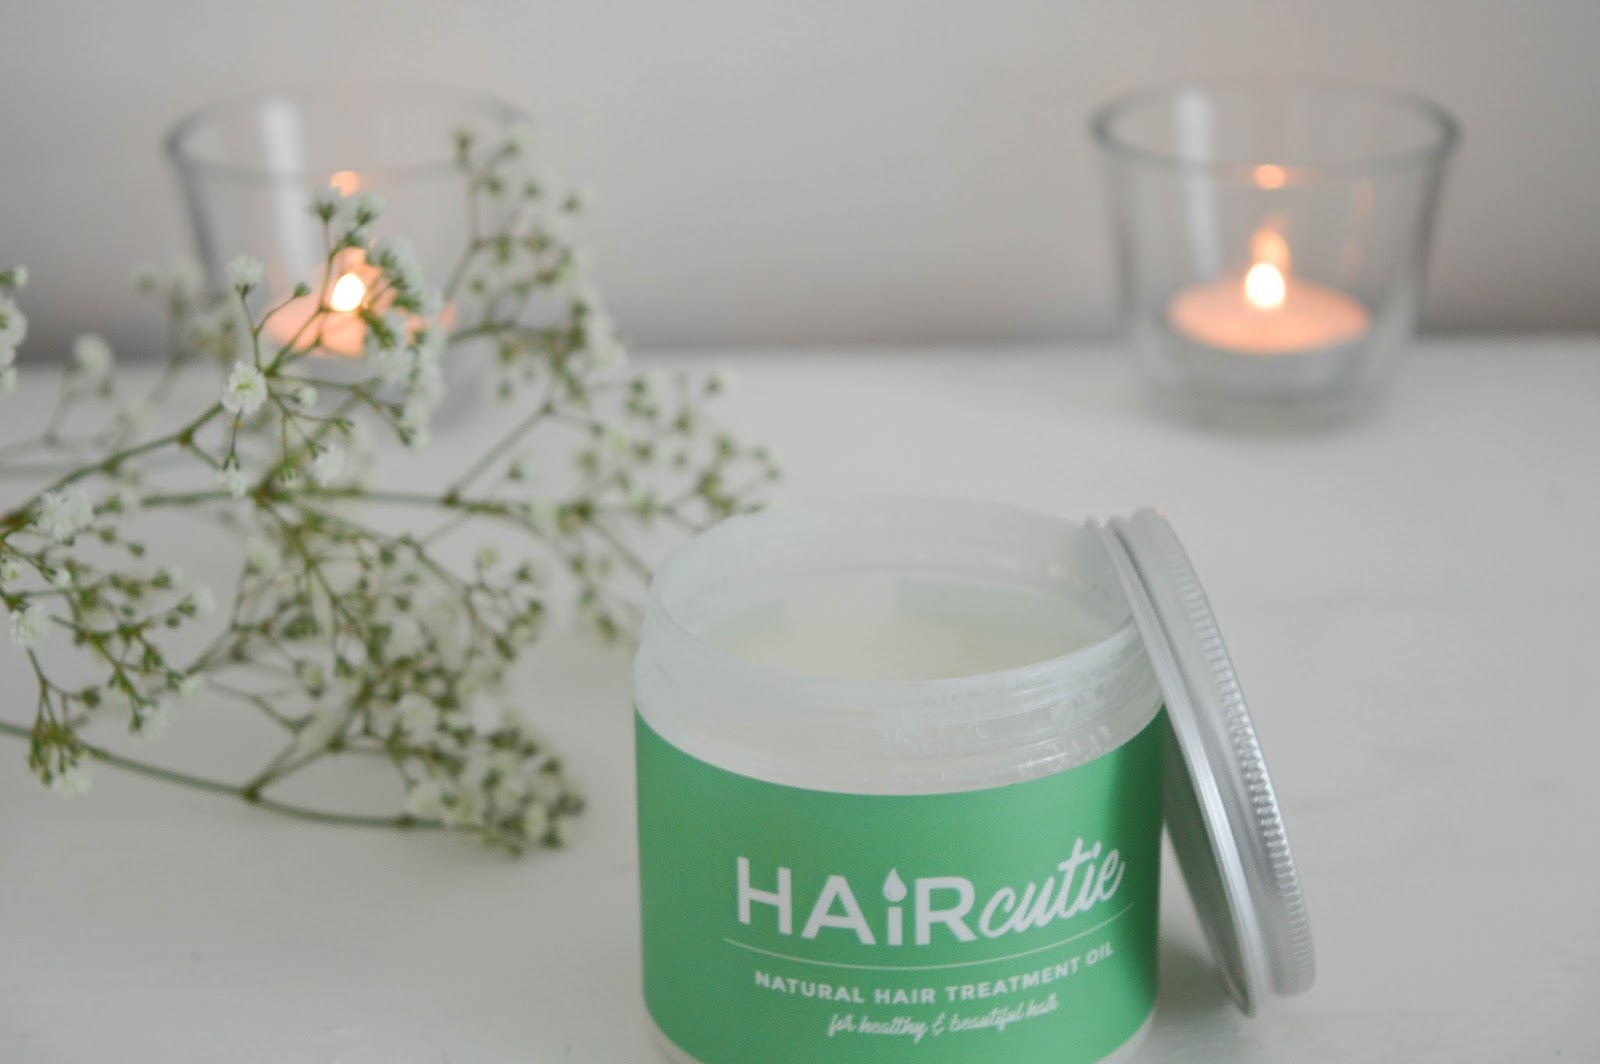 Haircutie Review, hair growth tips, lifestyle blog, UK beauty blog